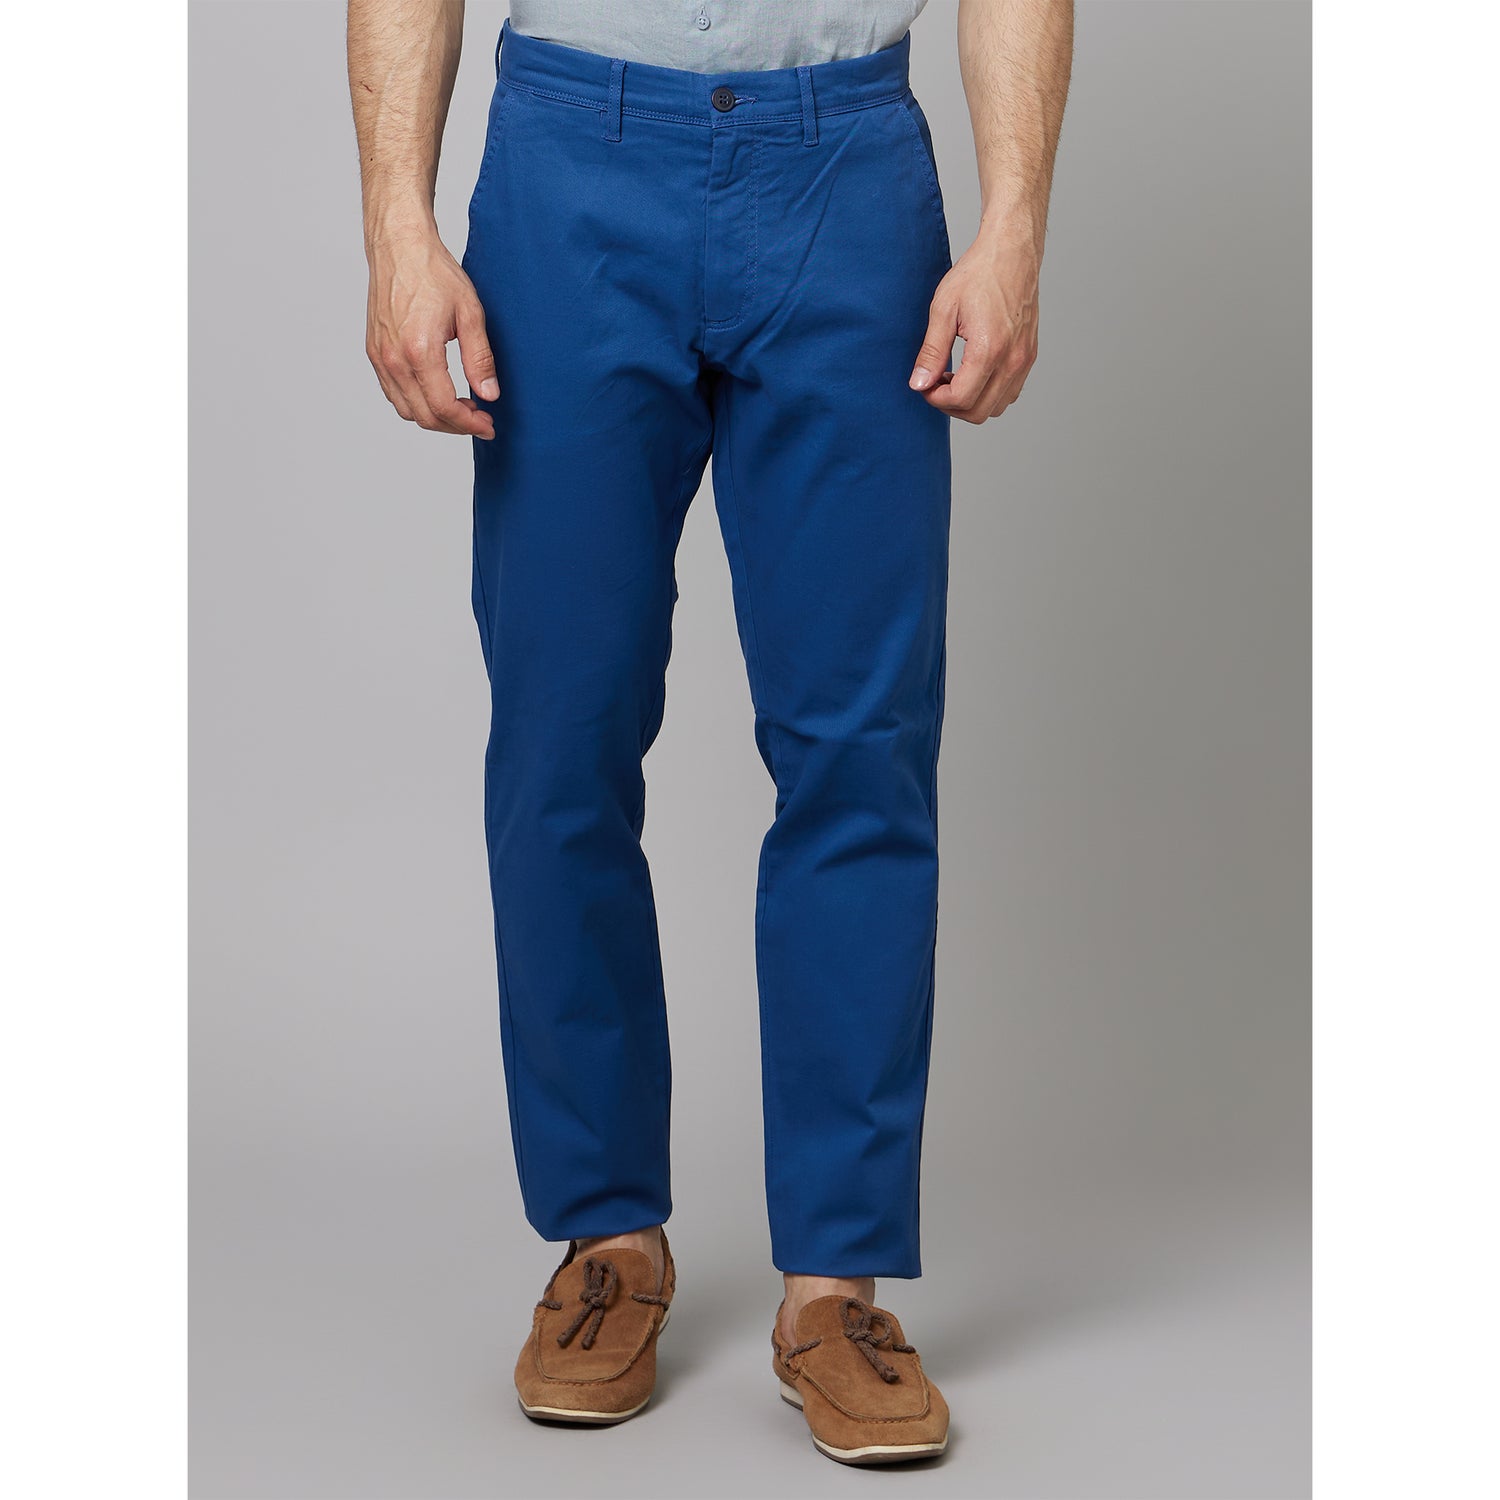 Dark Blue Mid Rise Plain Cotton Slim Fit Chinos Trousers (TOCHARLES)